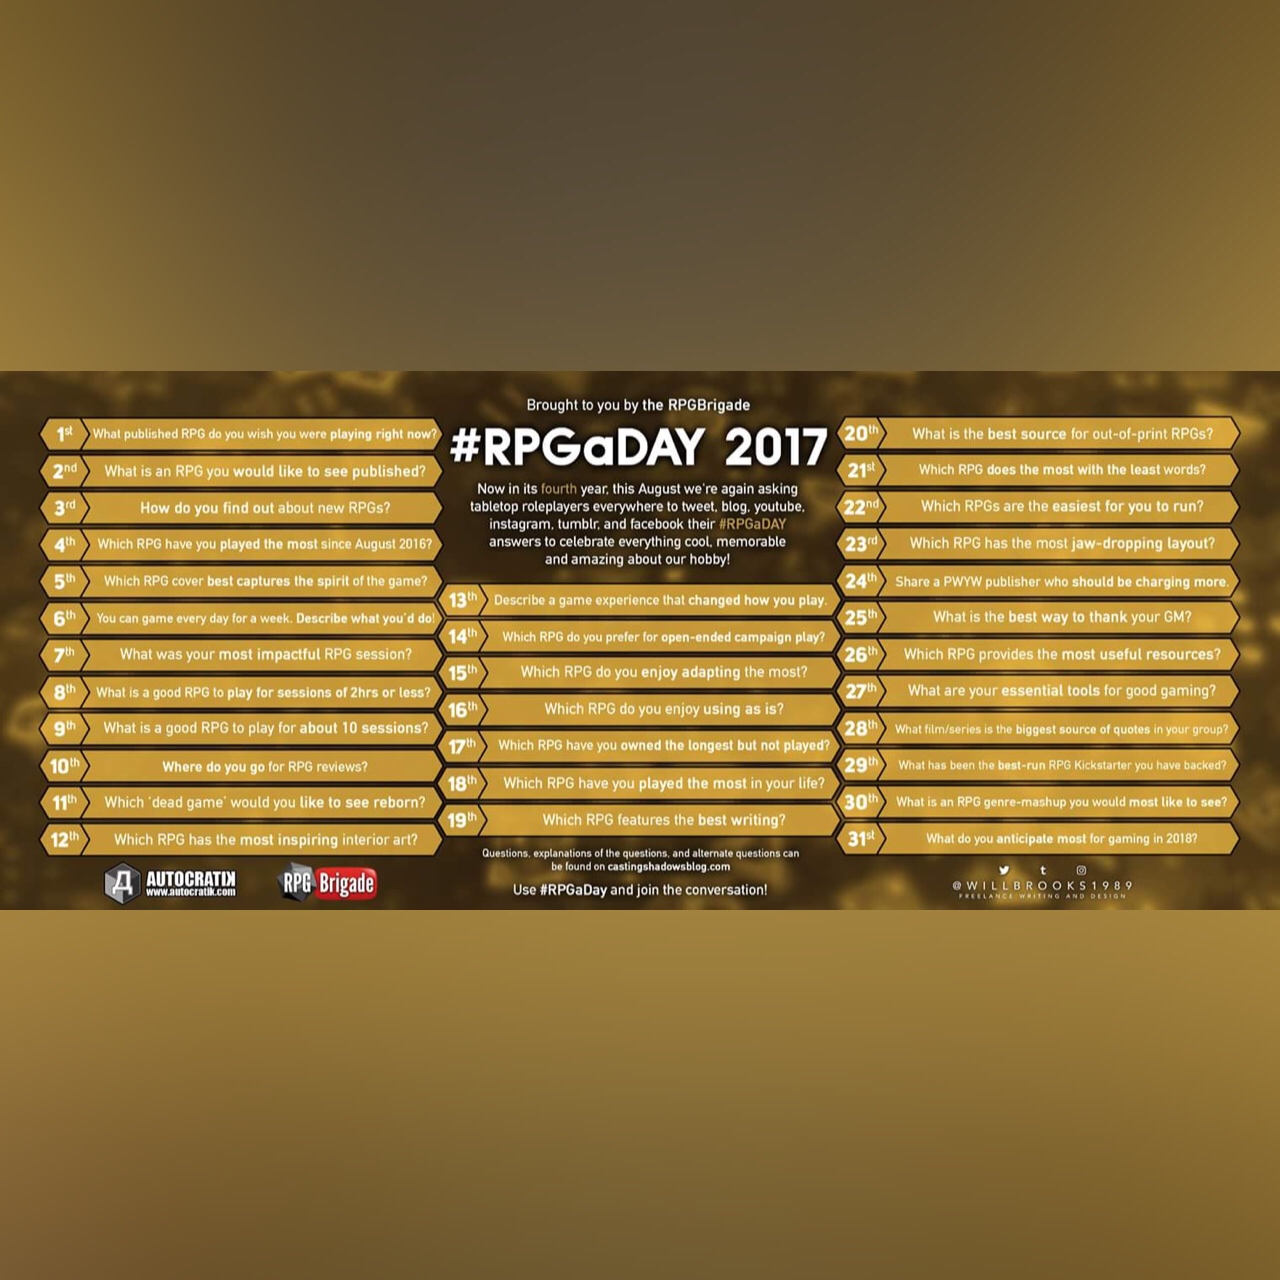 RPGaDAY 2017 August 16th Which RPG do you enjoy using as is?